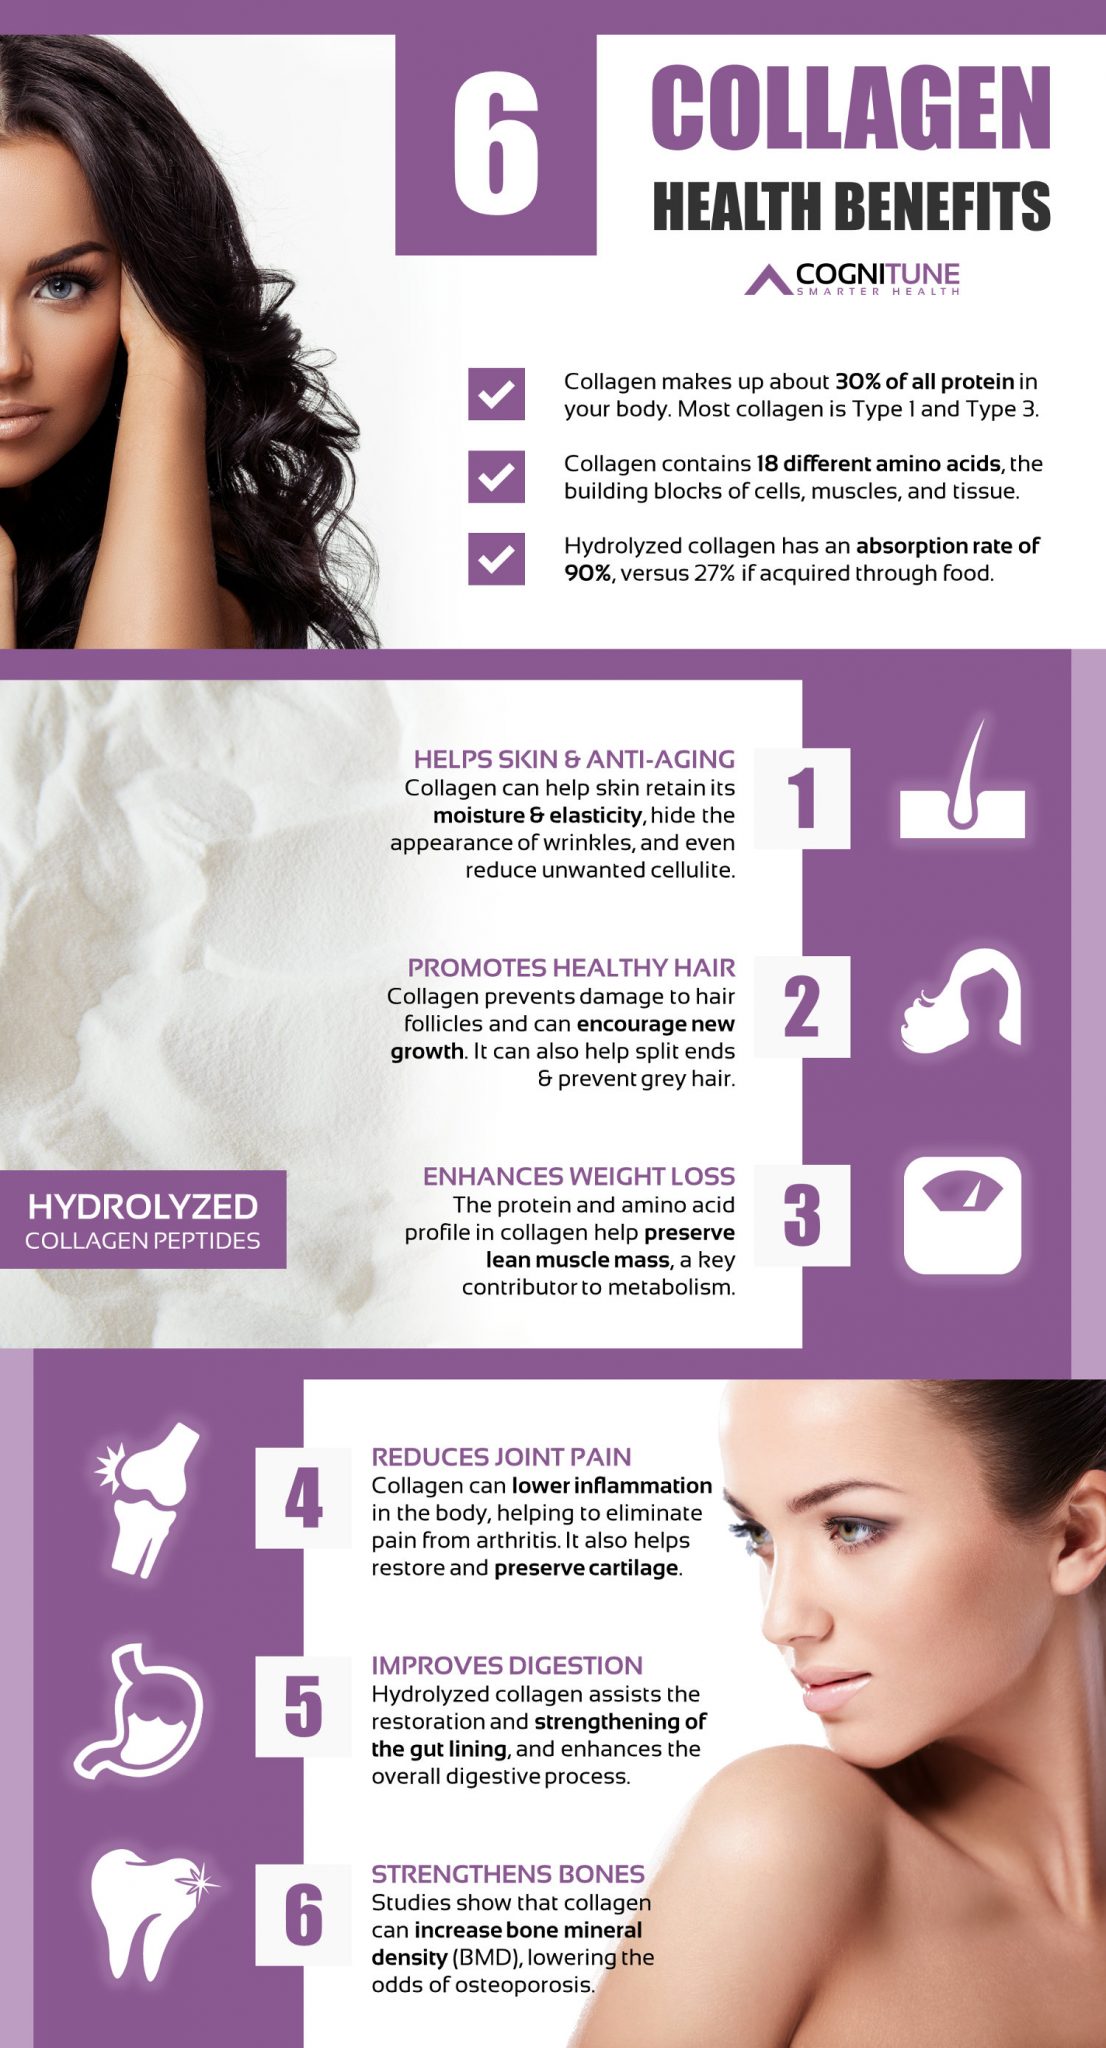 Benefits of Collagen in skin care